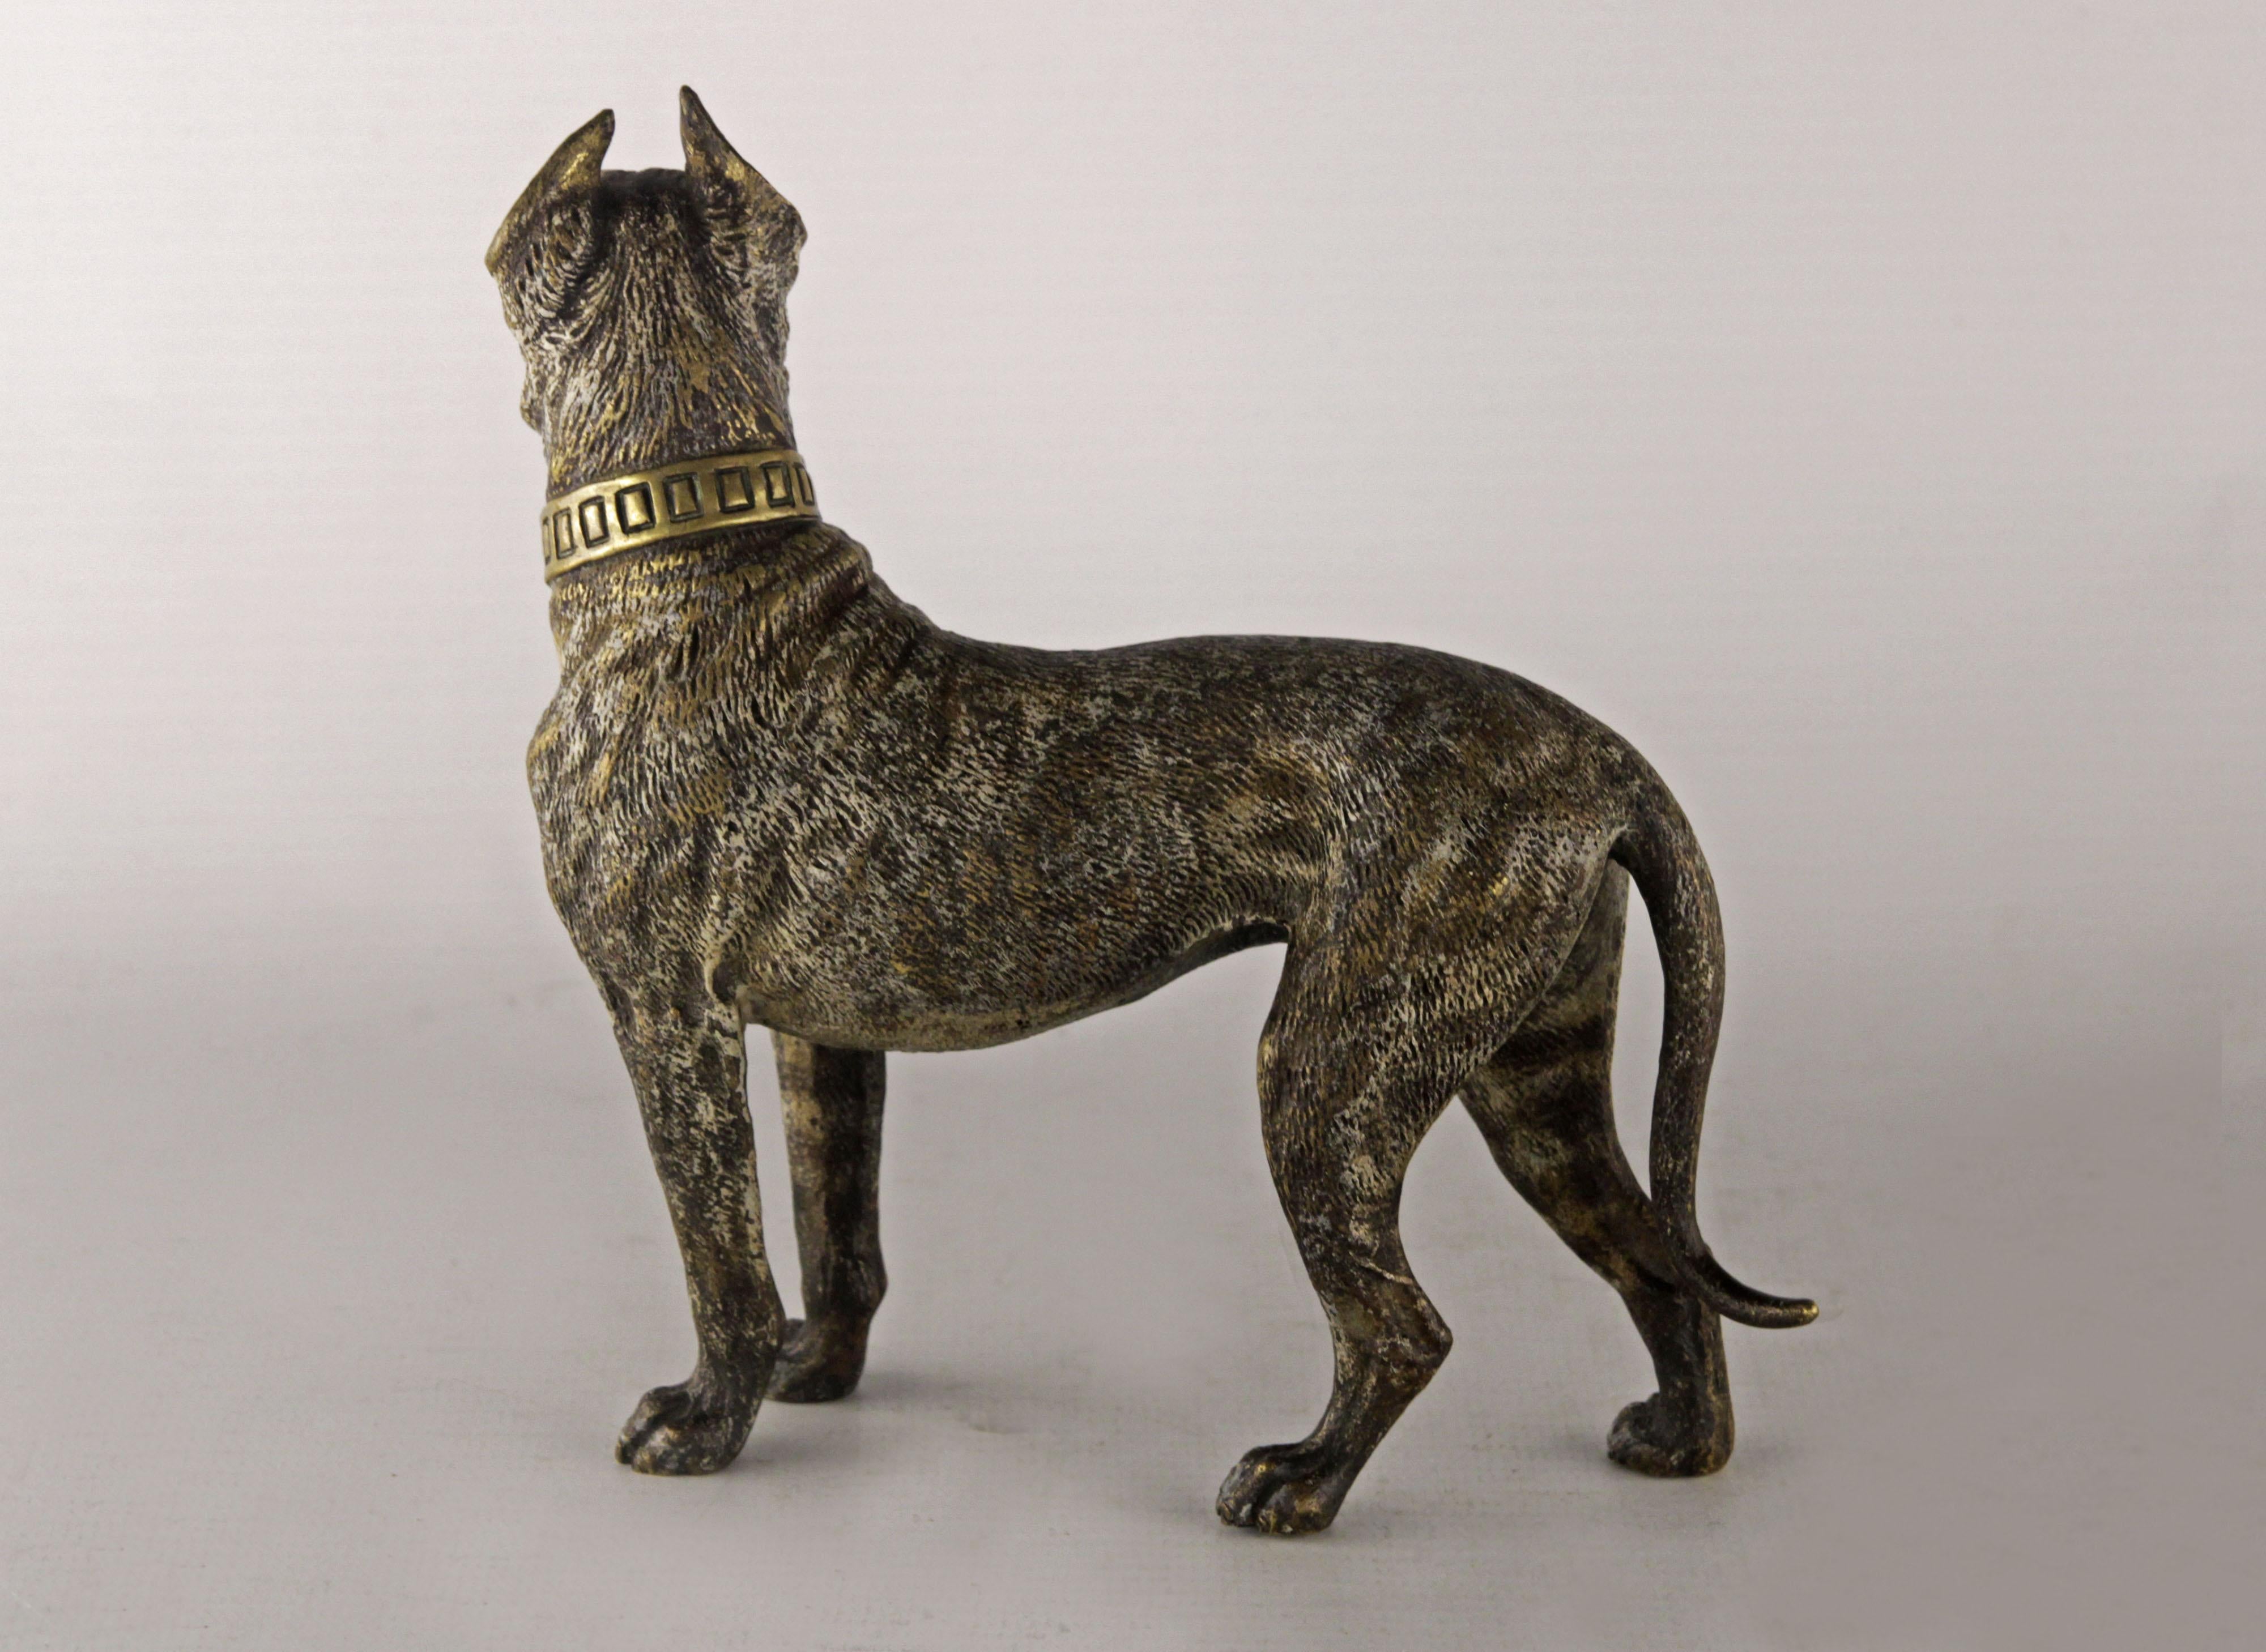 Antique Viennese bronze dog
Circa 1920 Origin Austria
Perfect condition (natural wear)
original patina
Antique Vienna Bronze figure of a Great Dane

From the Viennese workshops came small chiseled and polychrome bronze figures that achieved great